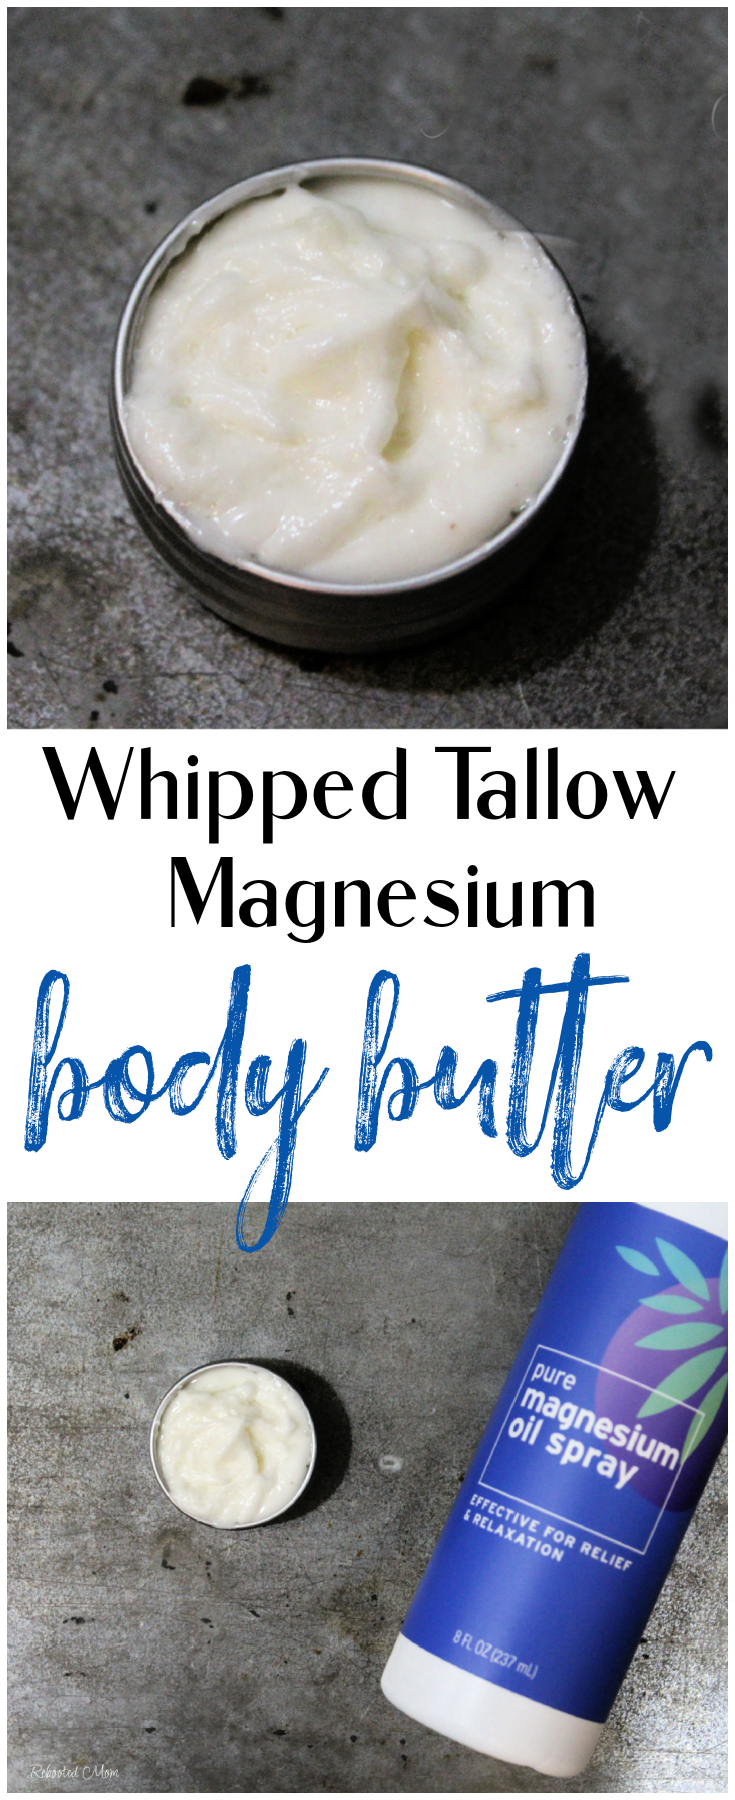 Moisturizing Whipped Tallow Magnesium Body Butter with the benefit of magnesium oil within - completely natural, homemade, calming DIY body butter!  #magnesium #tallow #whipped #bodybutter #DIY